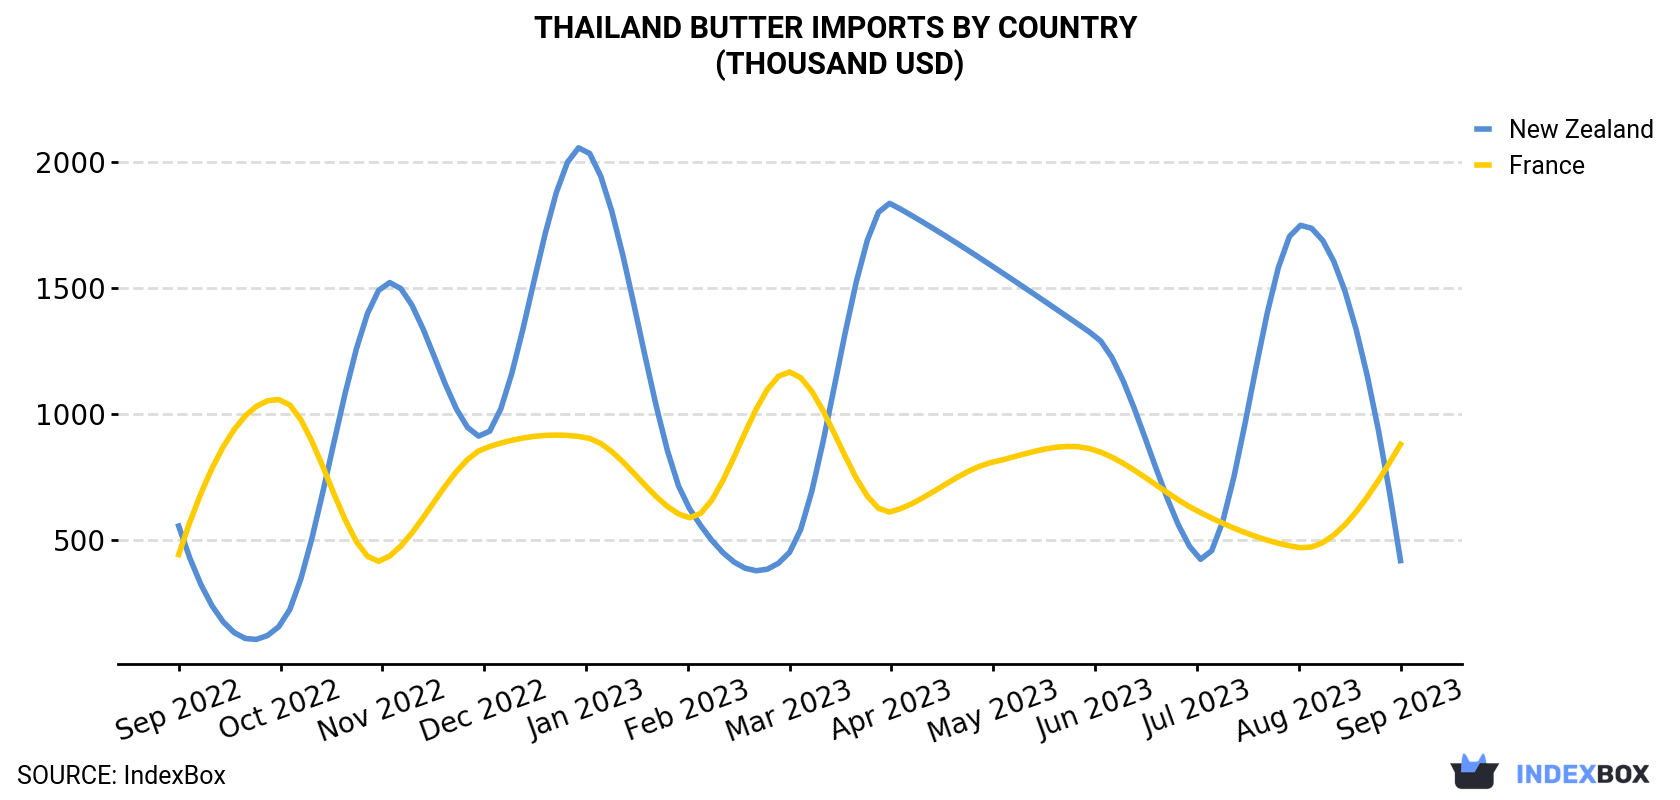 Thailand Butter Imports By Country (Thousand USD)